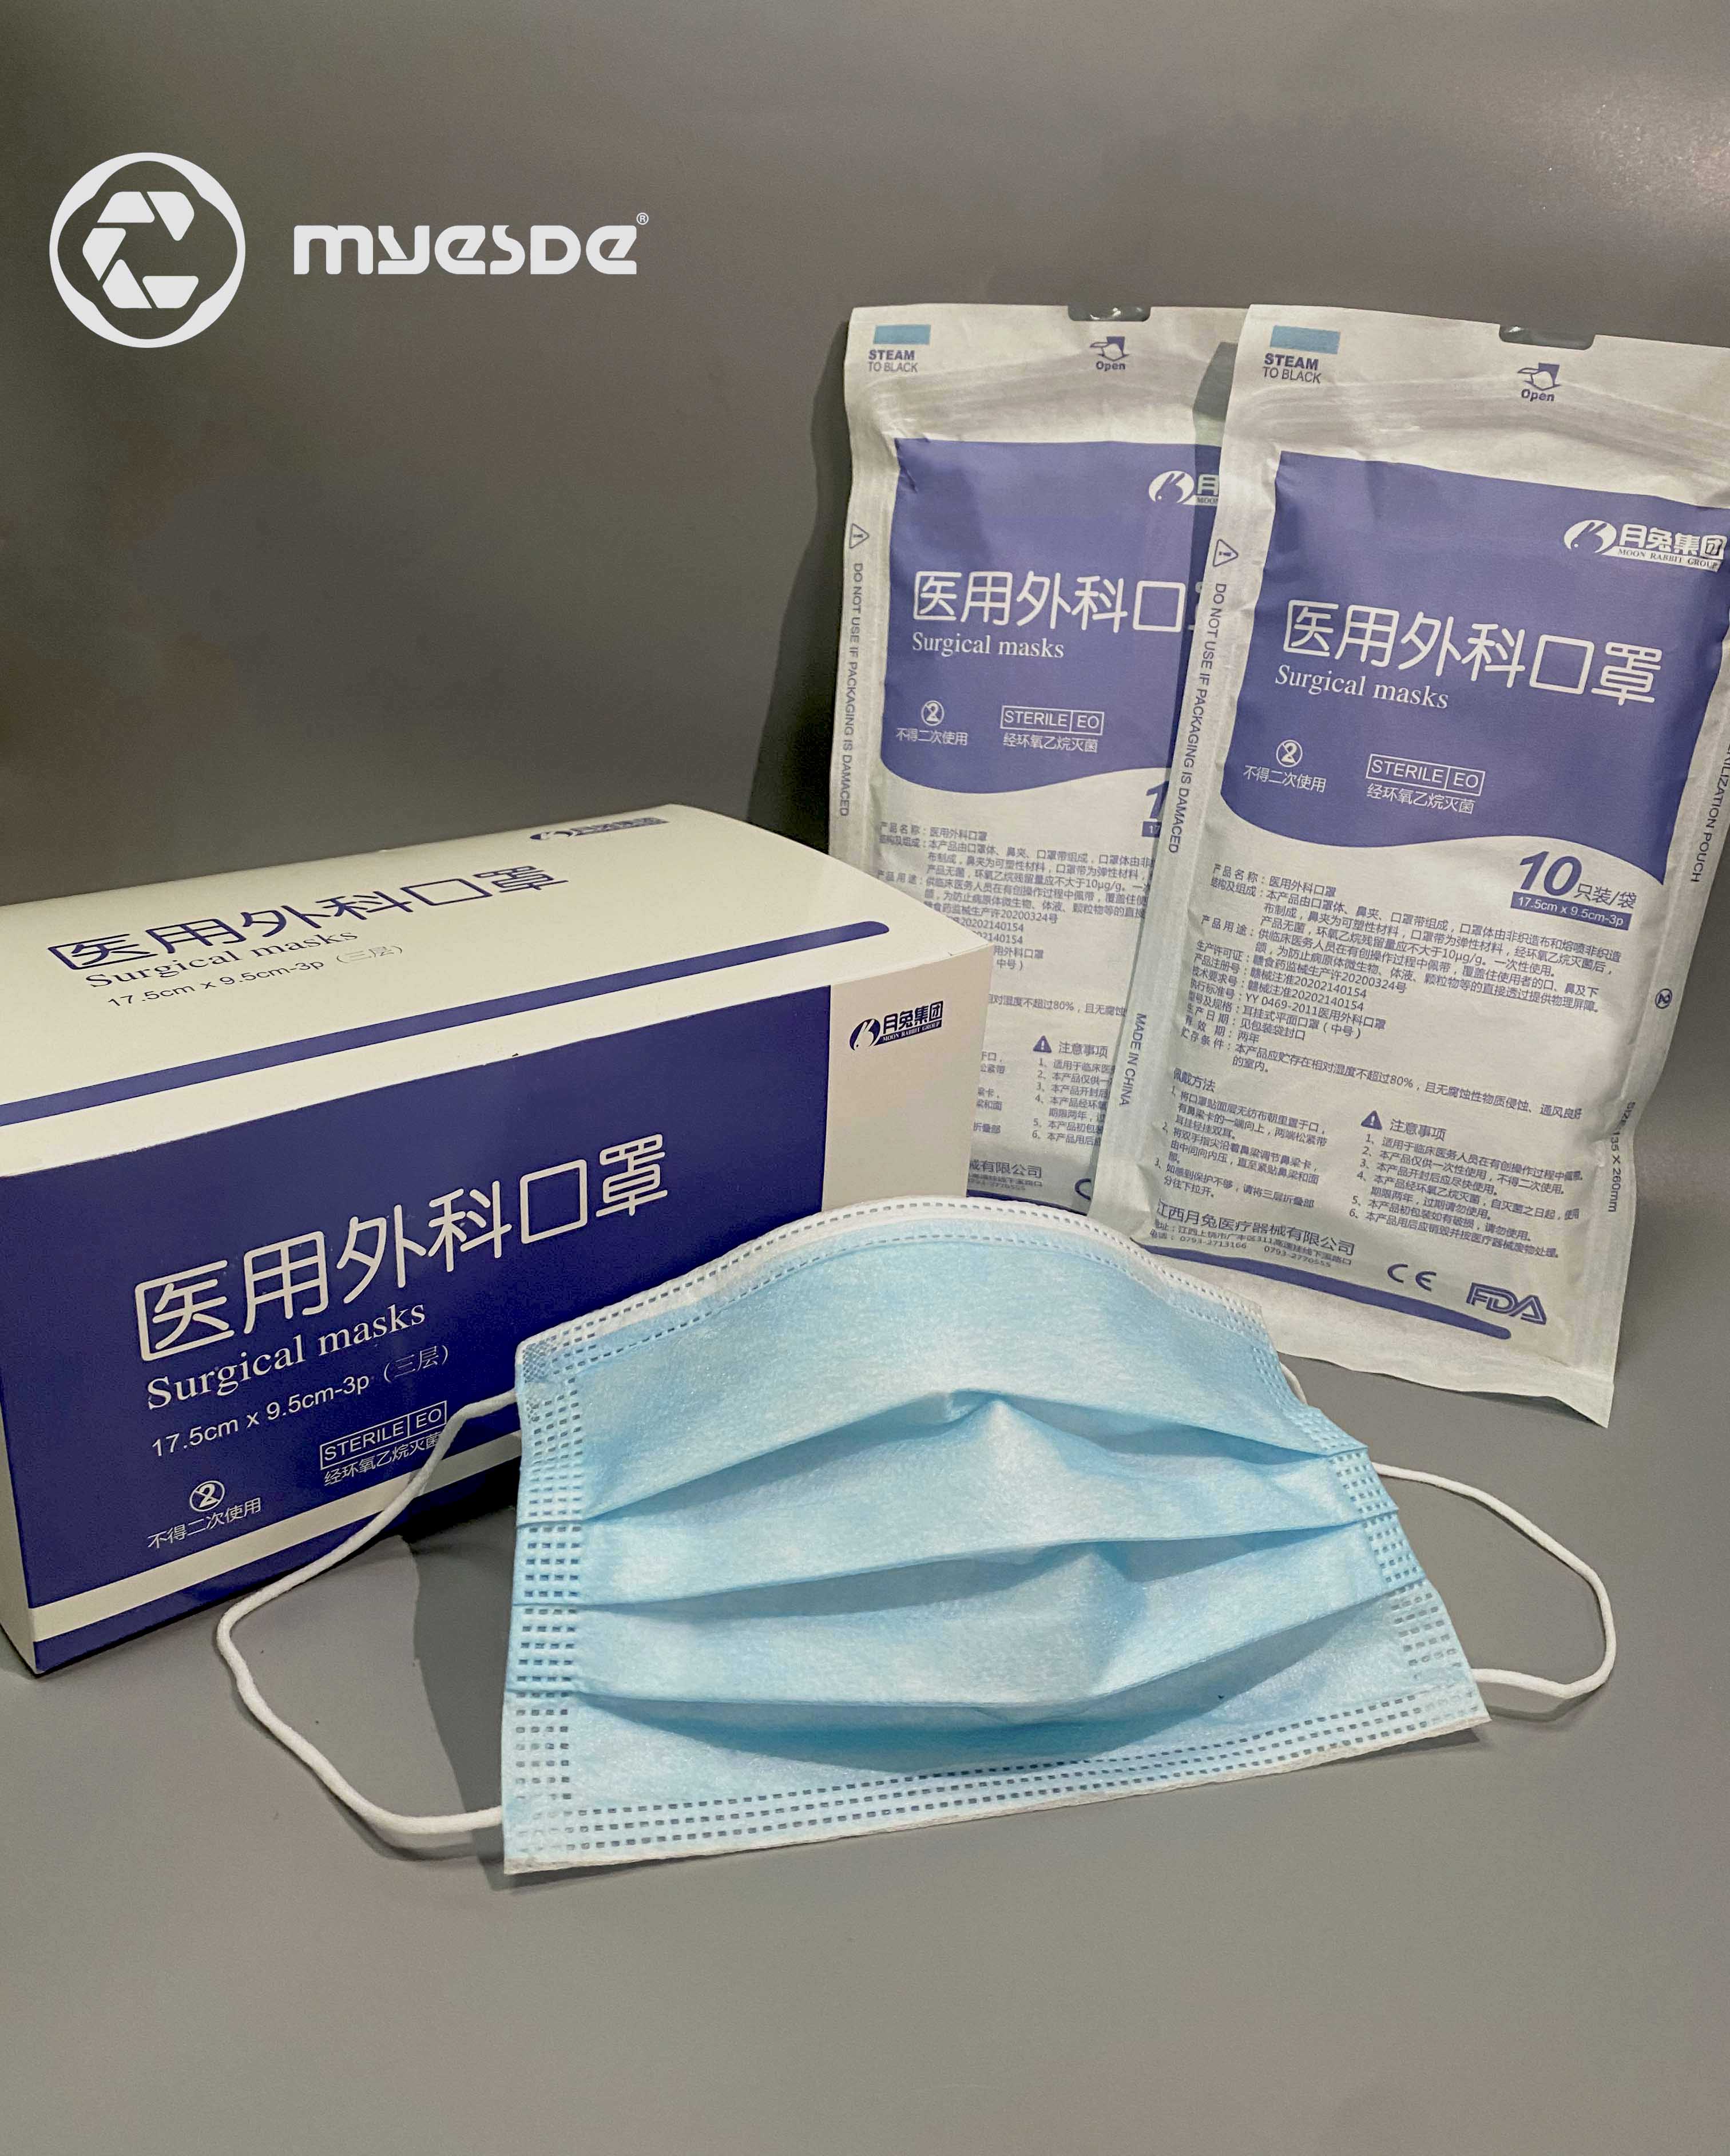 Manufacturer CE/ FDA Medical 3Ply Earloop Mouth Mask 3 Layer Disposable 3 ply Medical Face Mask